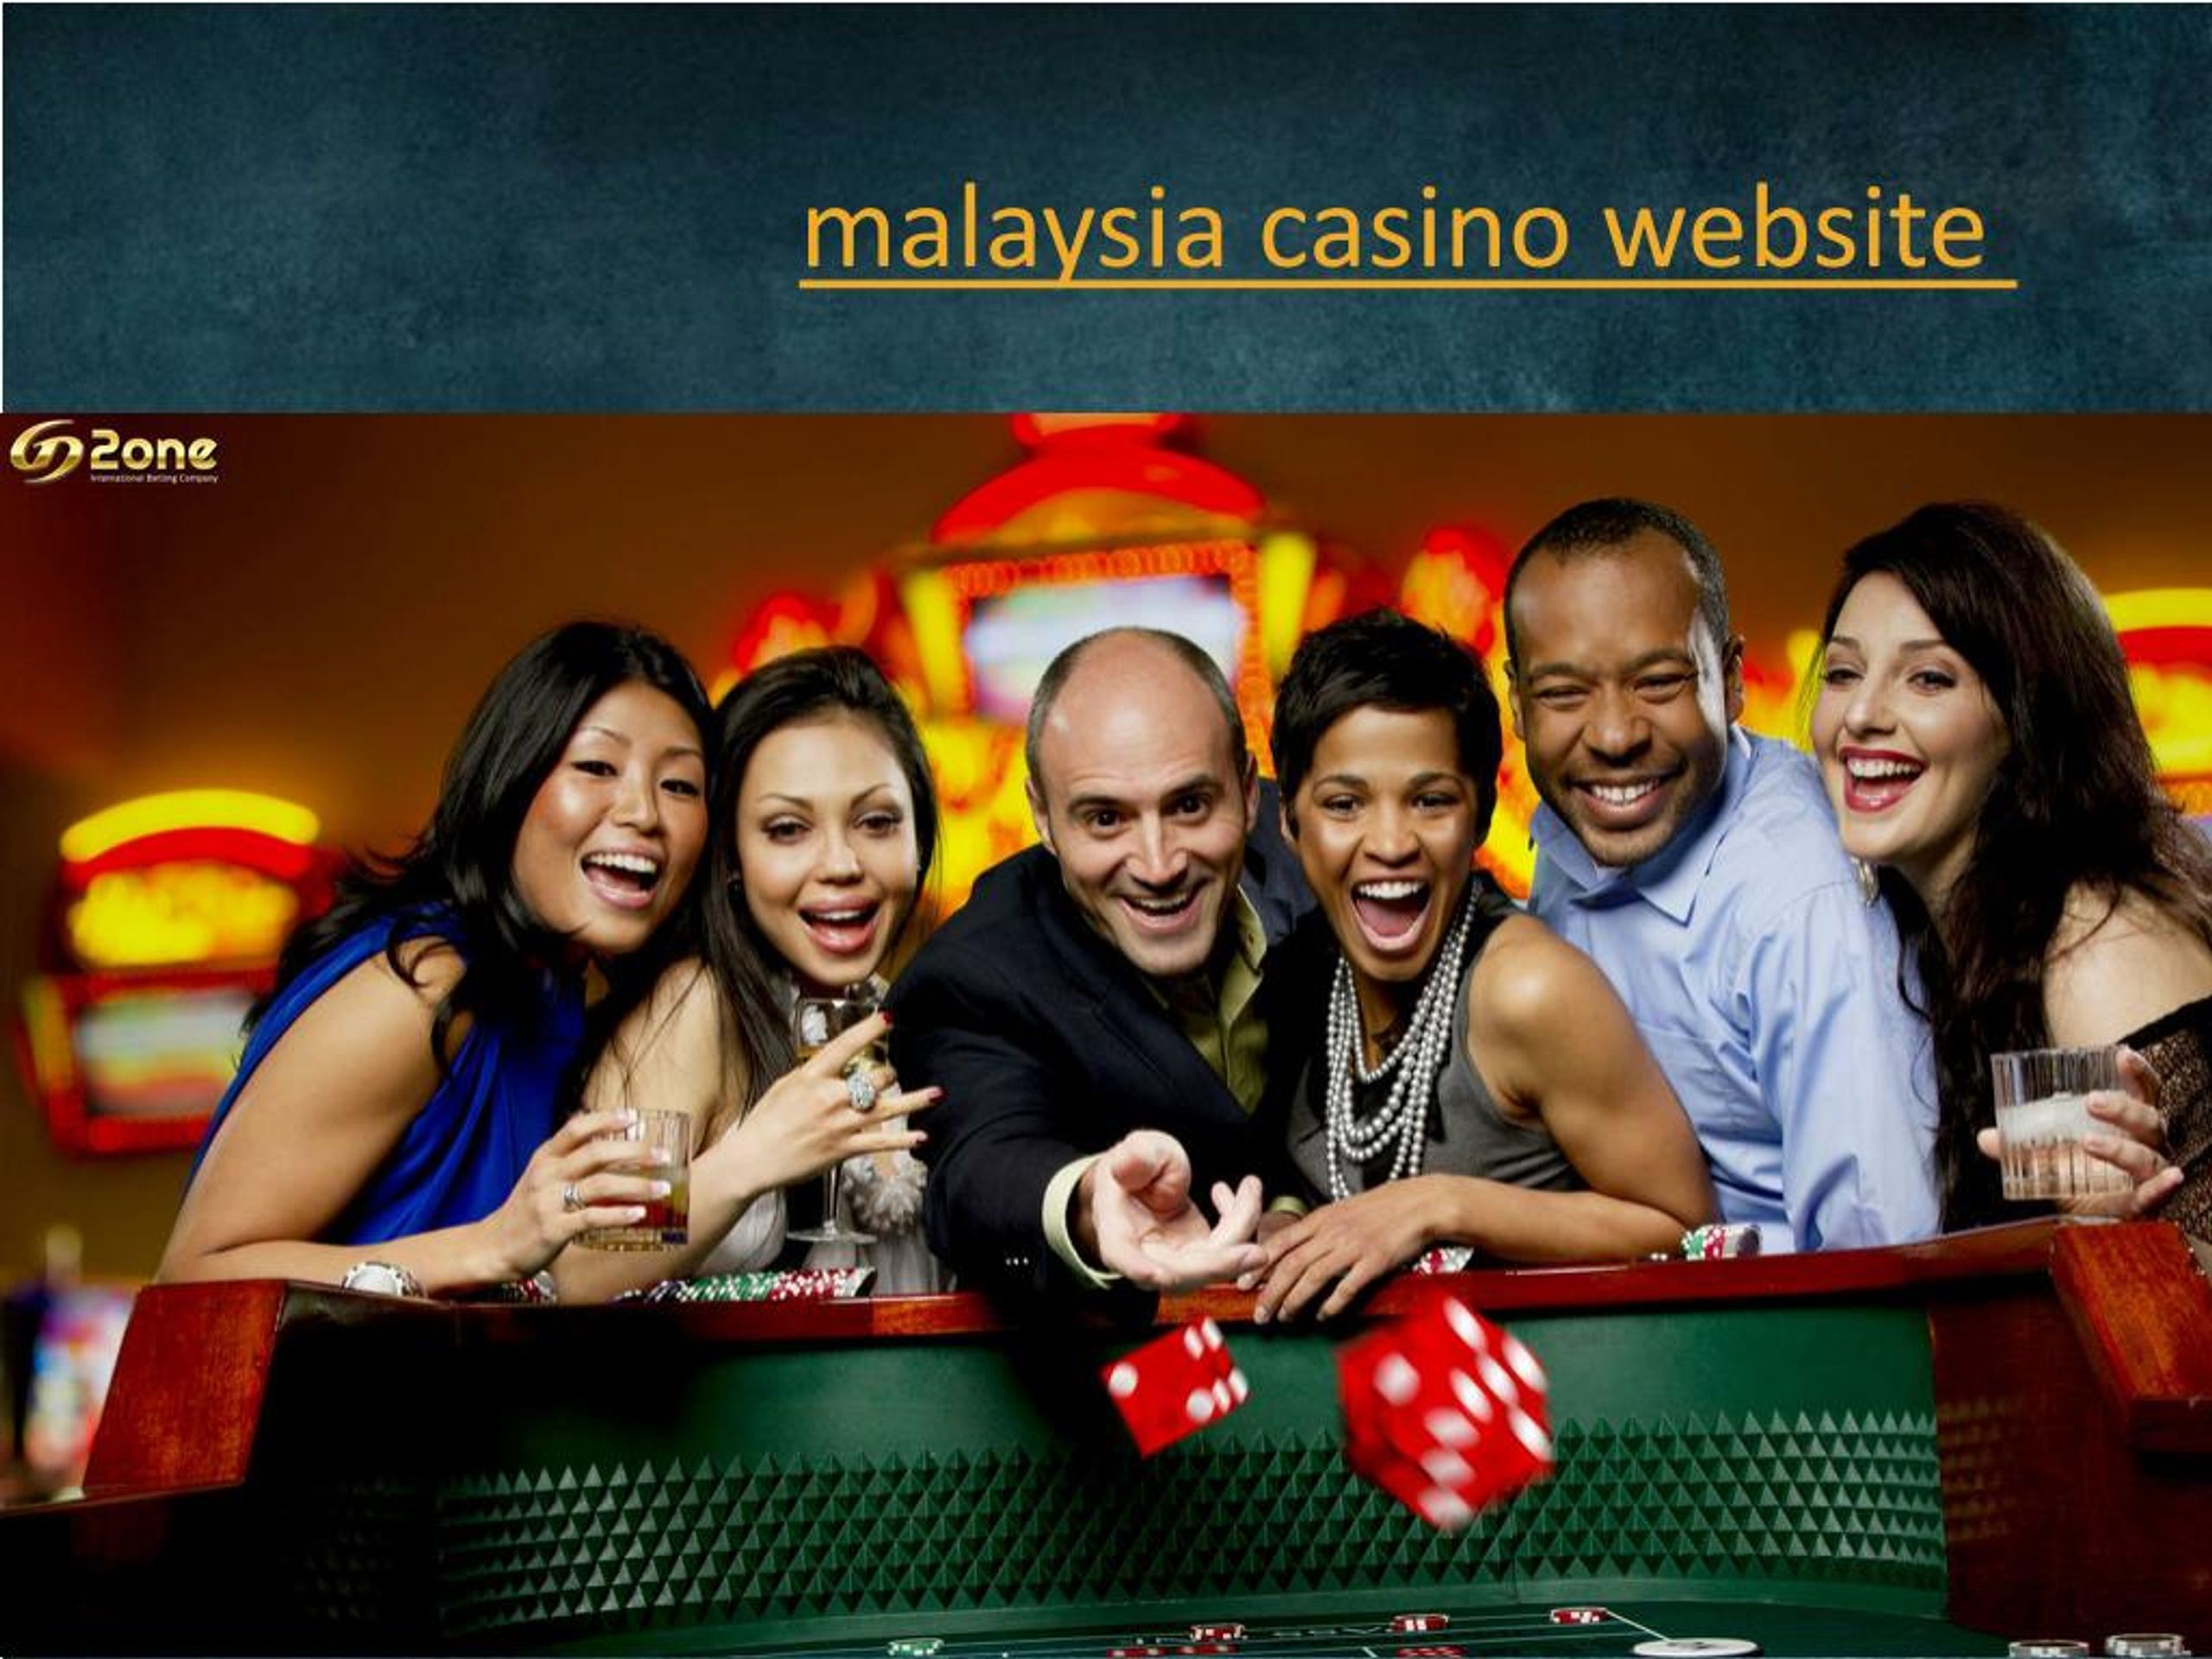 football betting sites in malaysia where do they sell